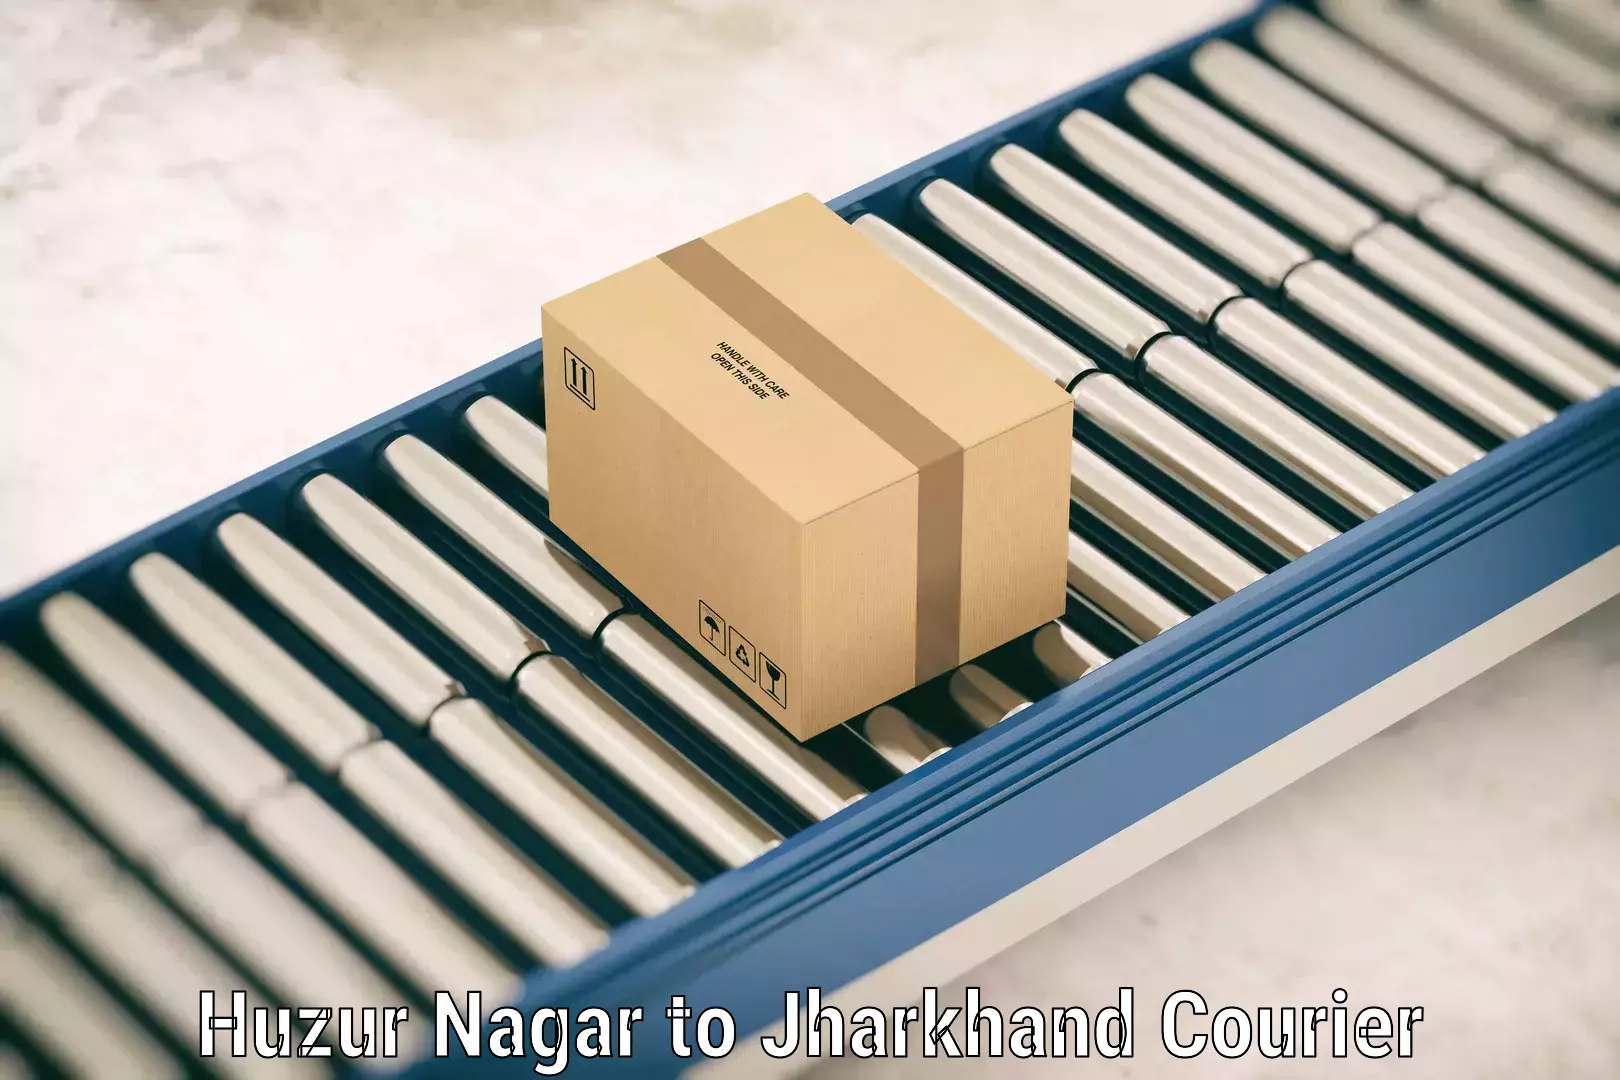 Express luggage delivery in Huzur Nagar to Tandwa